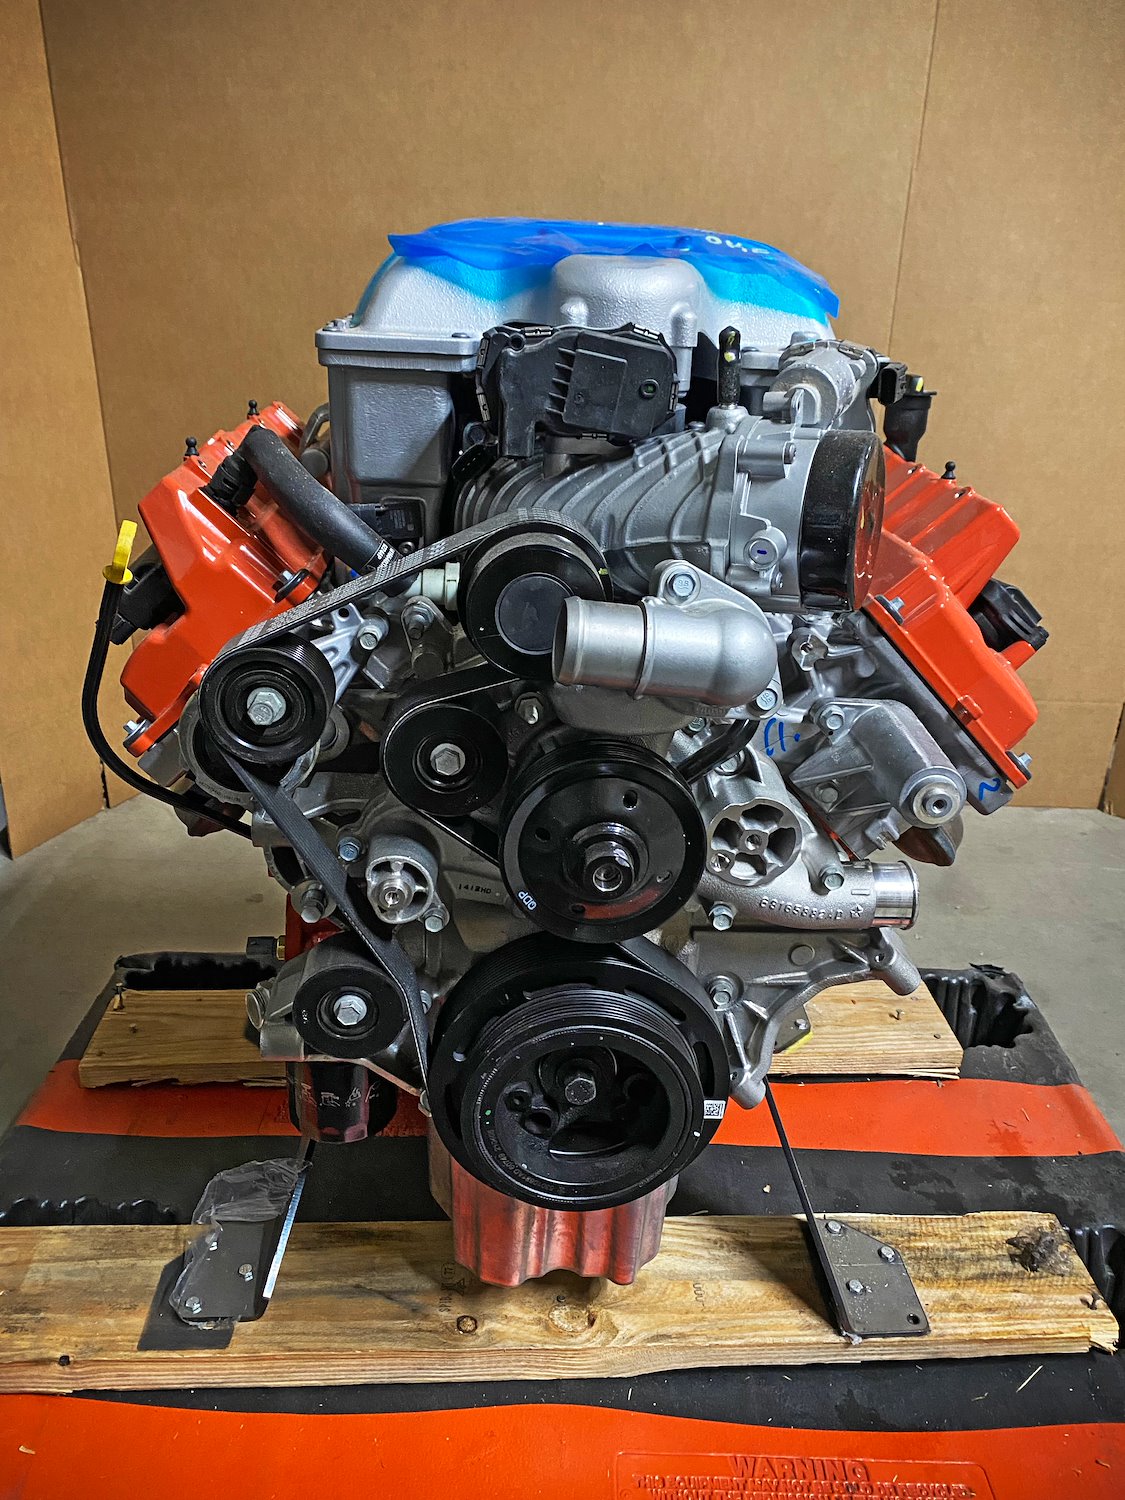 *BLEMISHED Hellcrate 6.2L Supercharged Gen III HEMI Crate Engine